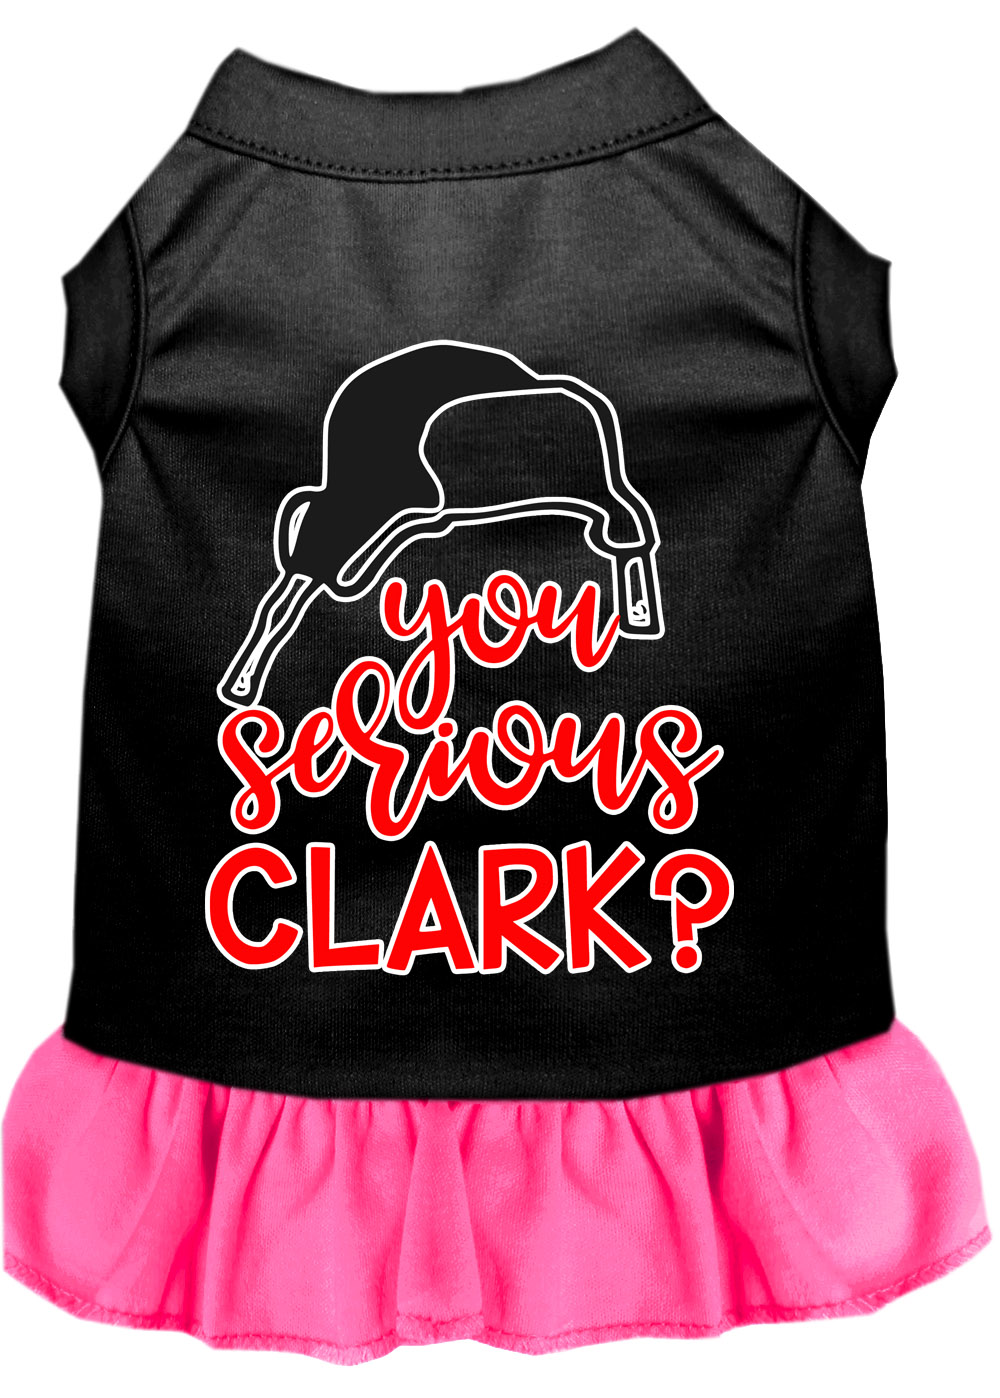 You Serious Clark? Screen Print Dog Dress Black with Bright Pink Sm